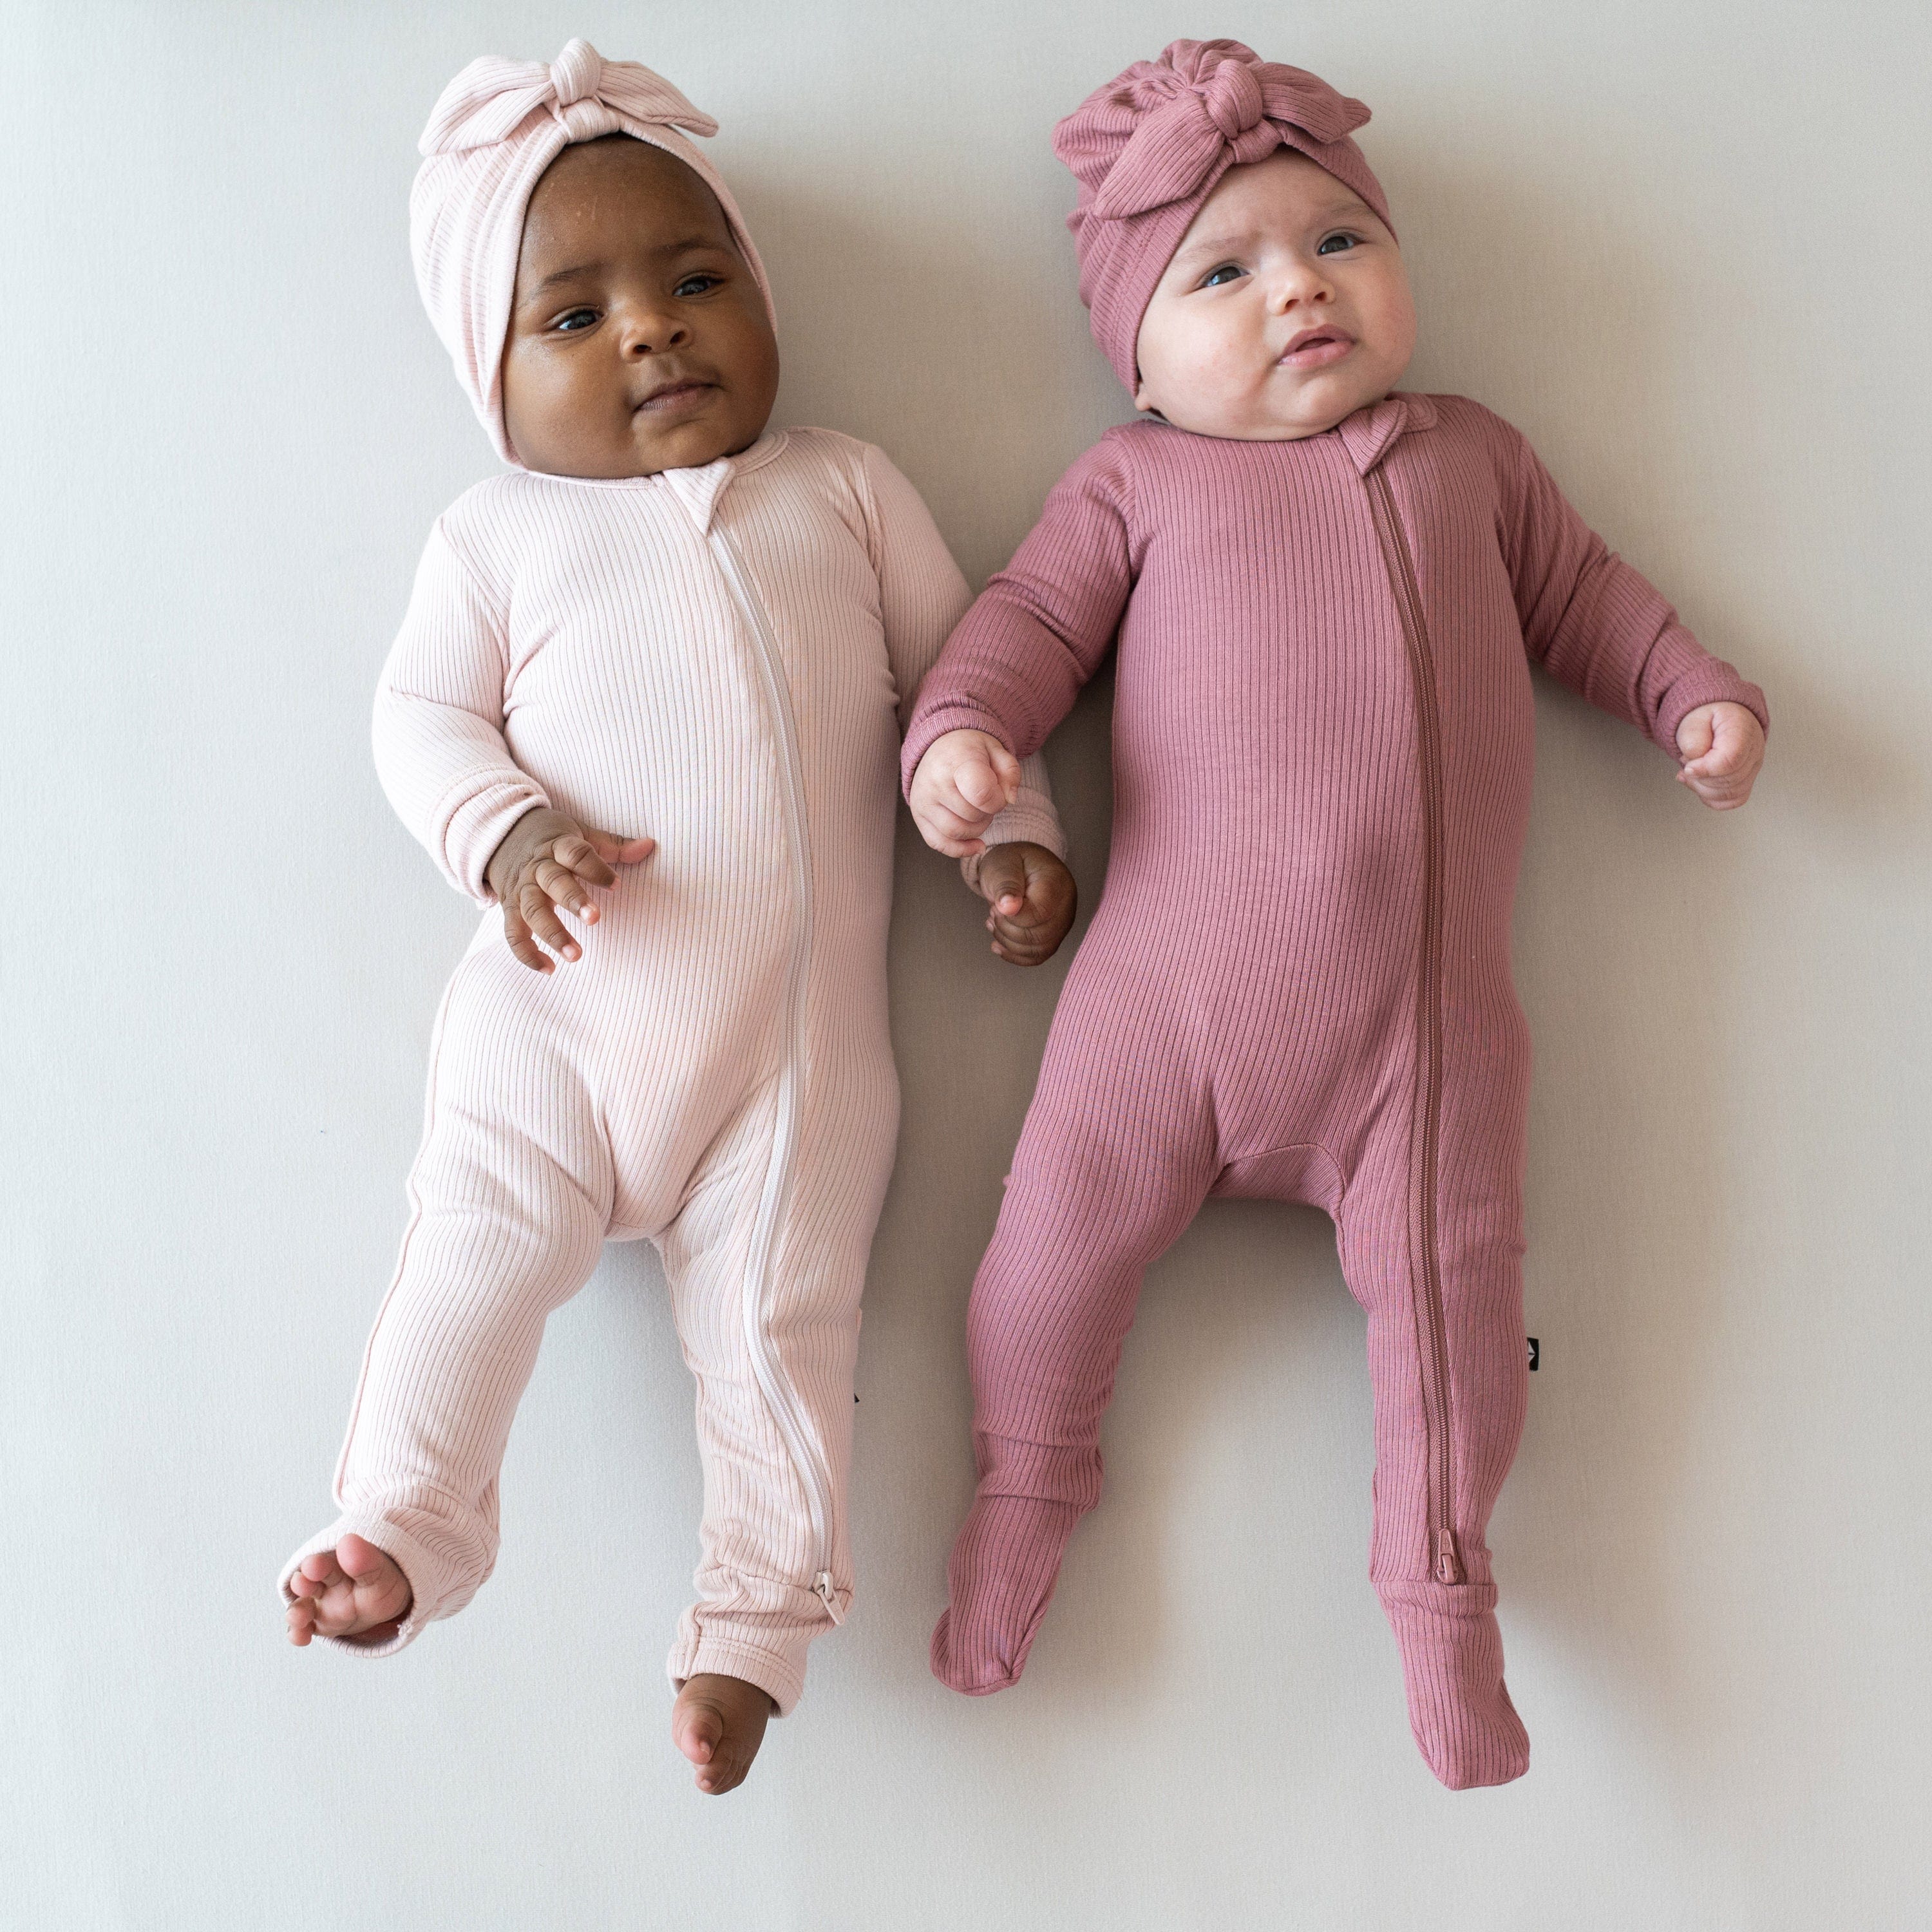 Infants wearing Kyte Baby Ribbed Zippered Rompers